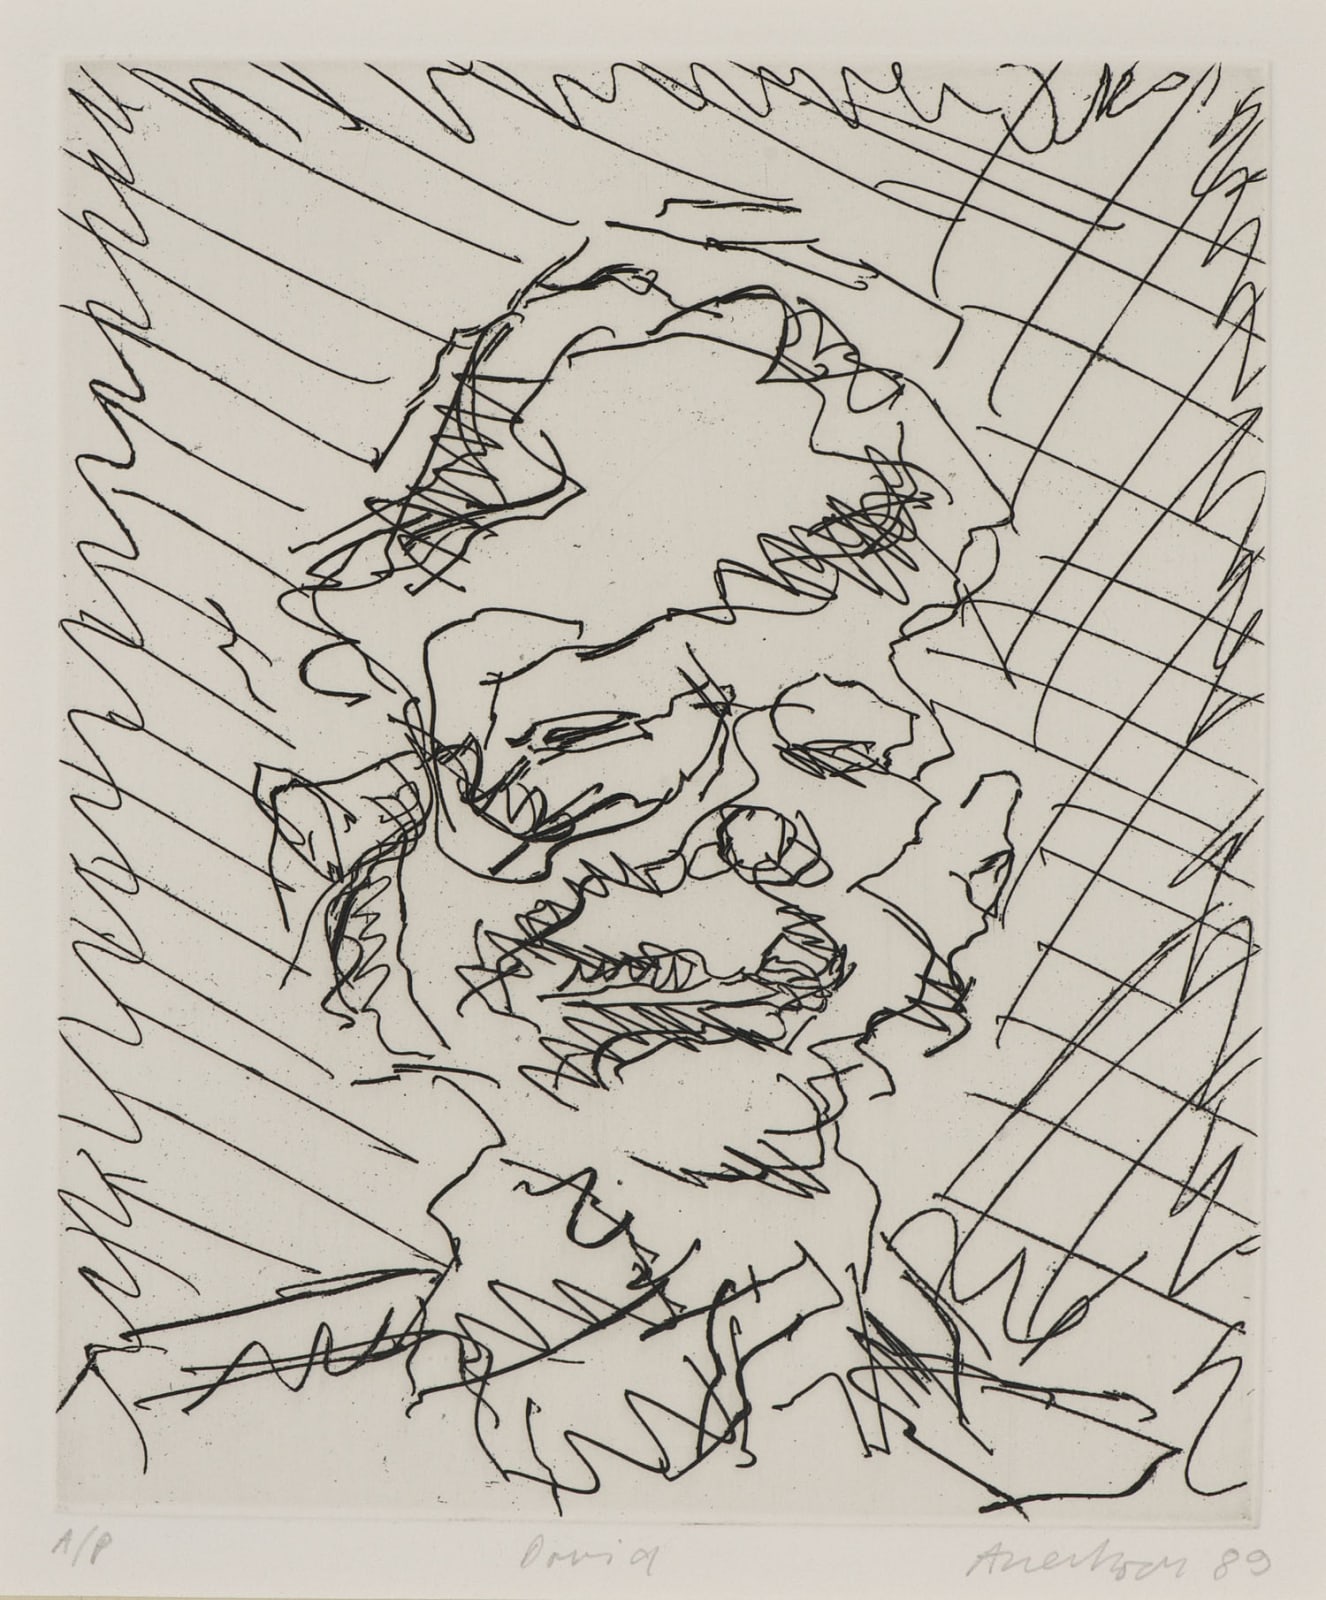 Frank Auerbach (1931-) David (part of seven portraits) 1989 Etching, printed on Somerset white paper, artist's proof outside the published edition of 50 19.3 x 16.3 cm Ben Uri Collection © Frank Auerbach, courtesy Marlborough Fine Art To see and discover more about this artist click here